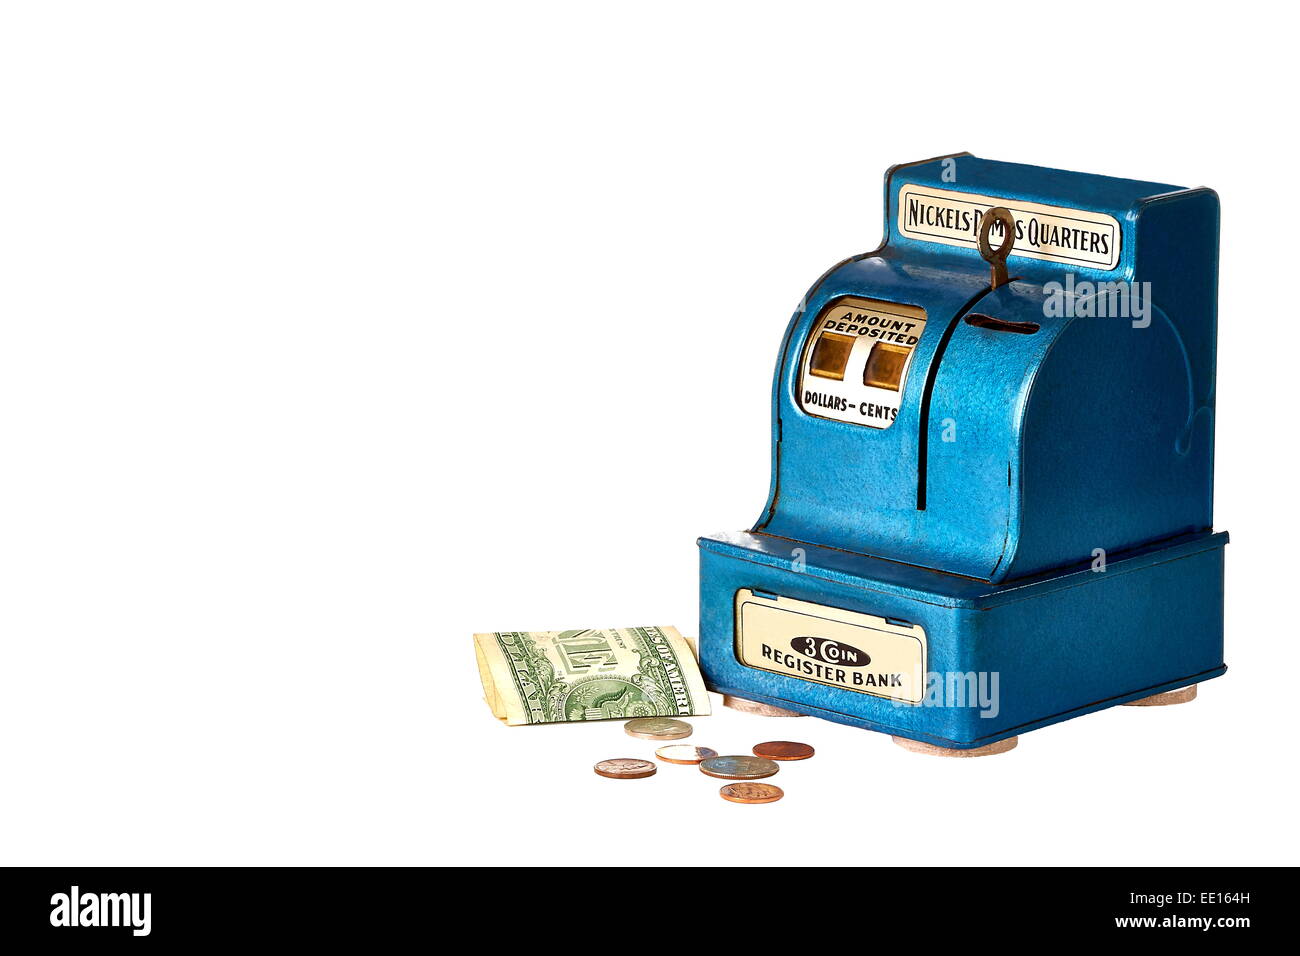 Vintage register bank with US currency Stock Photo